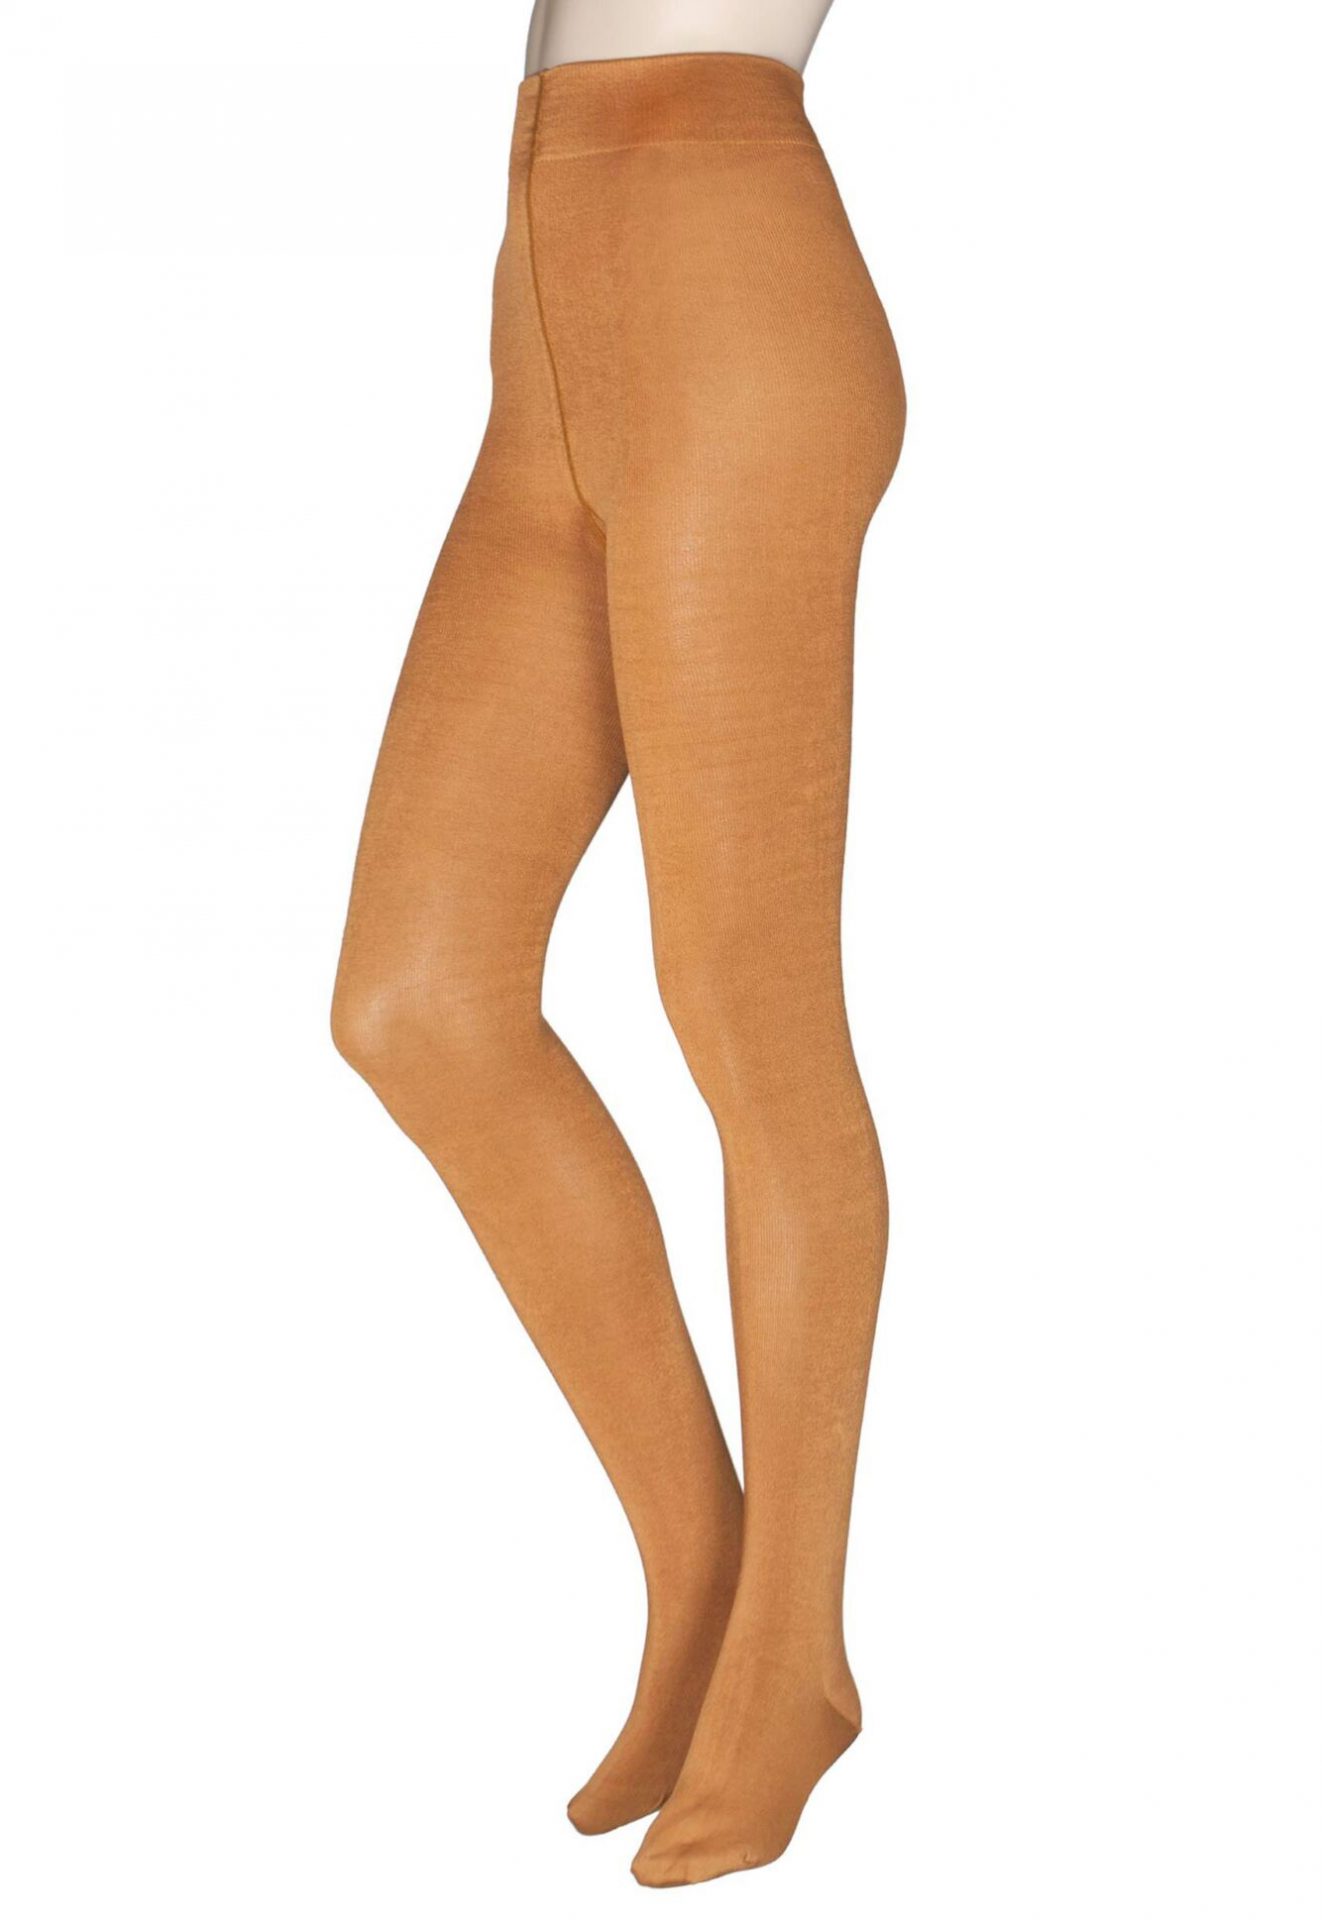 Bamboo pantyhose made from trees